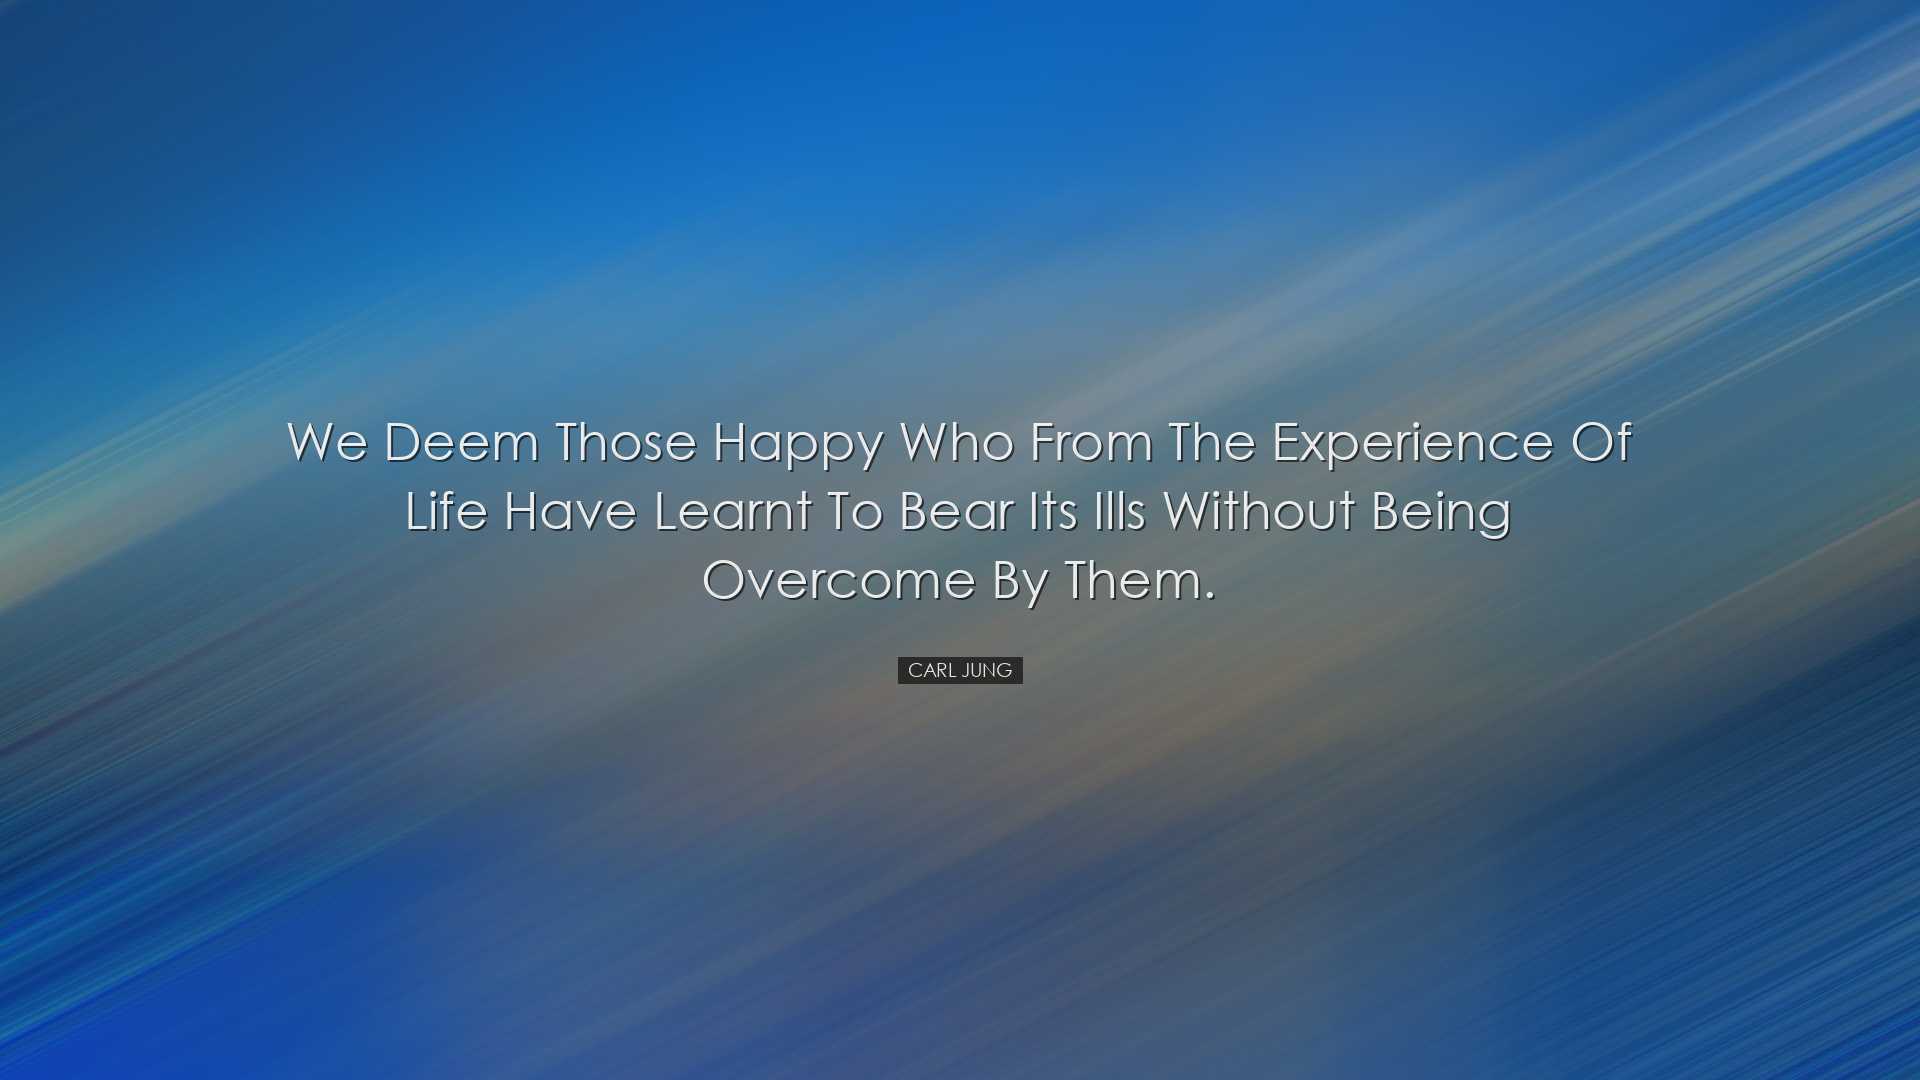 We deem those happy who from the experience of life have learnt to